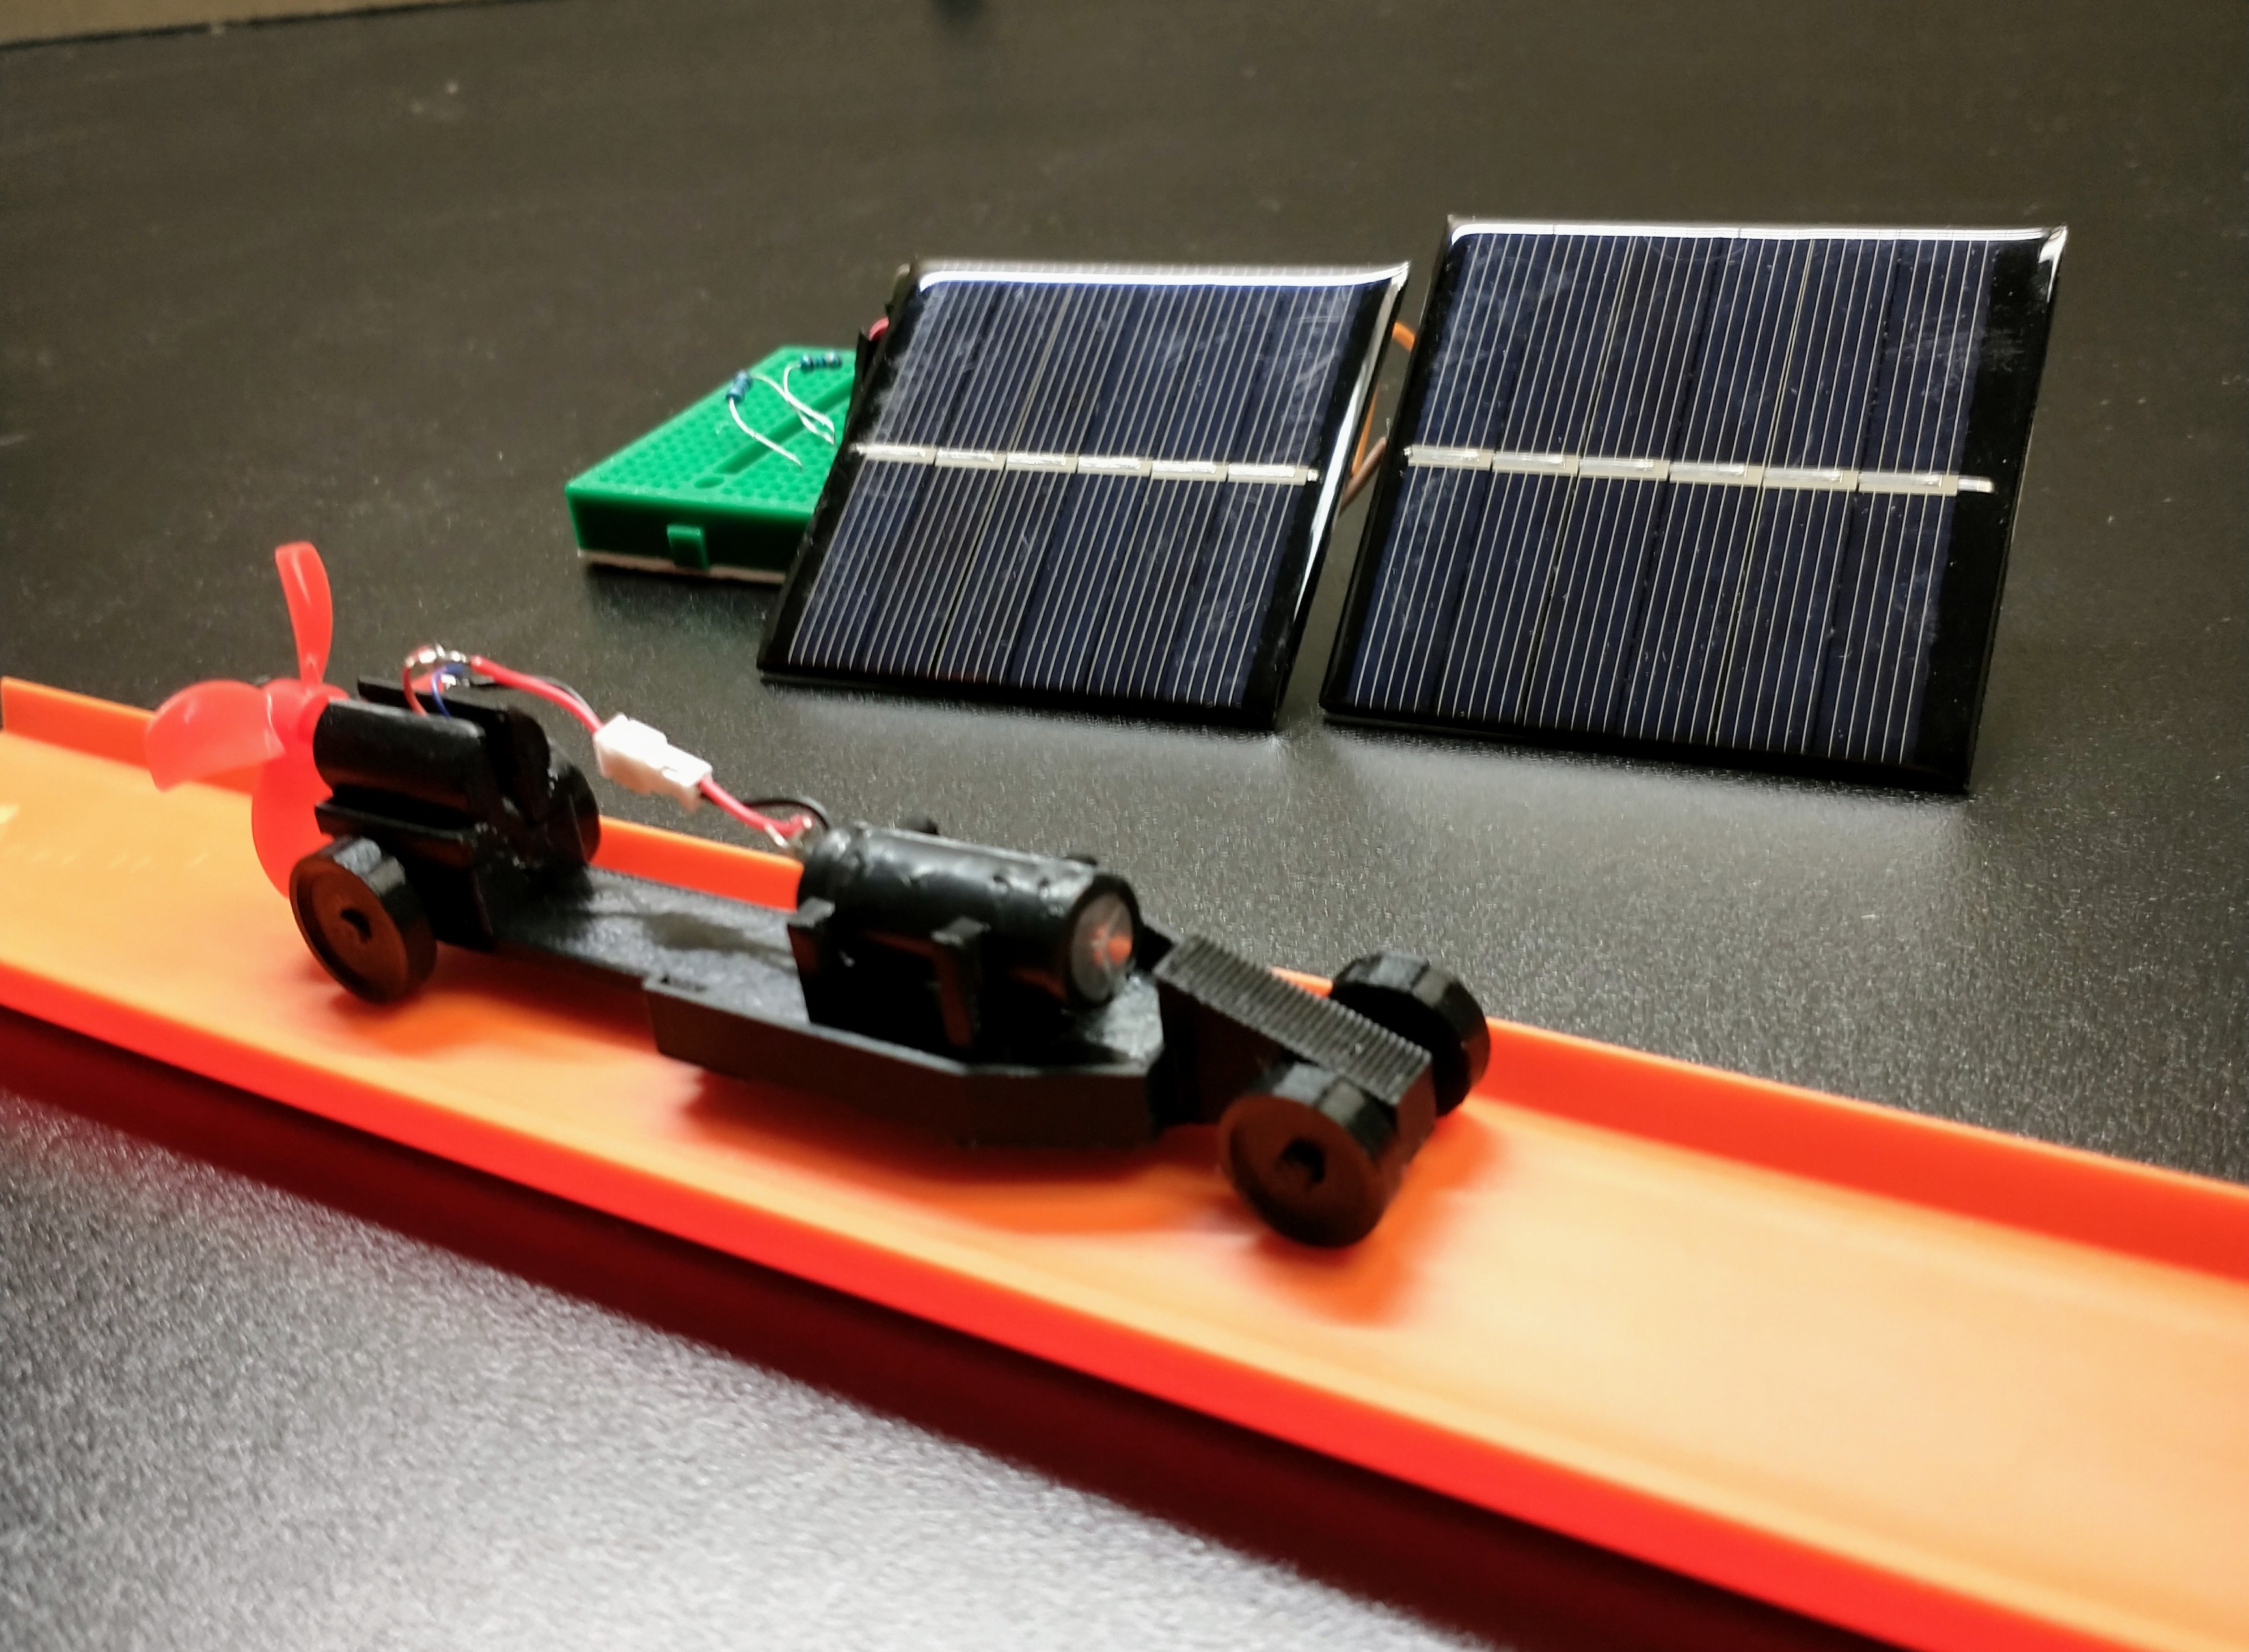 A 3D printed car on orange Hot Wheels track next to two solar cells.